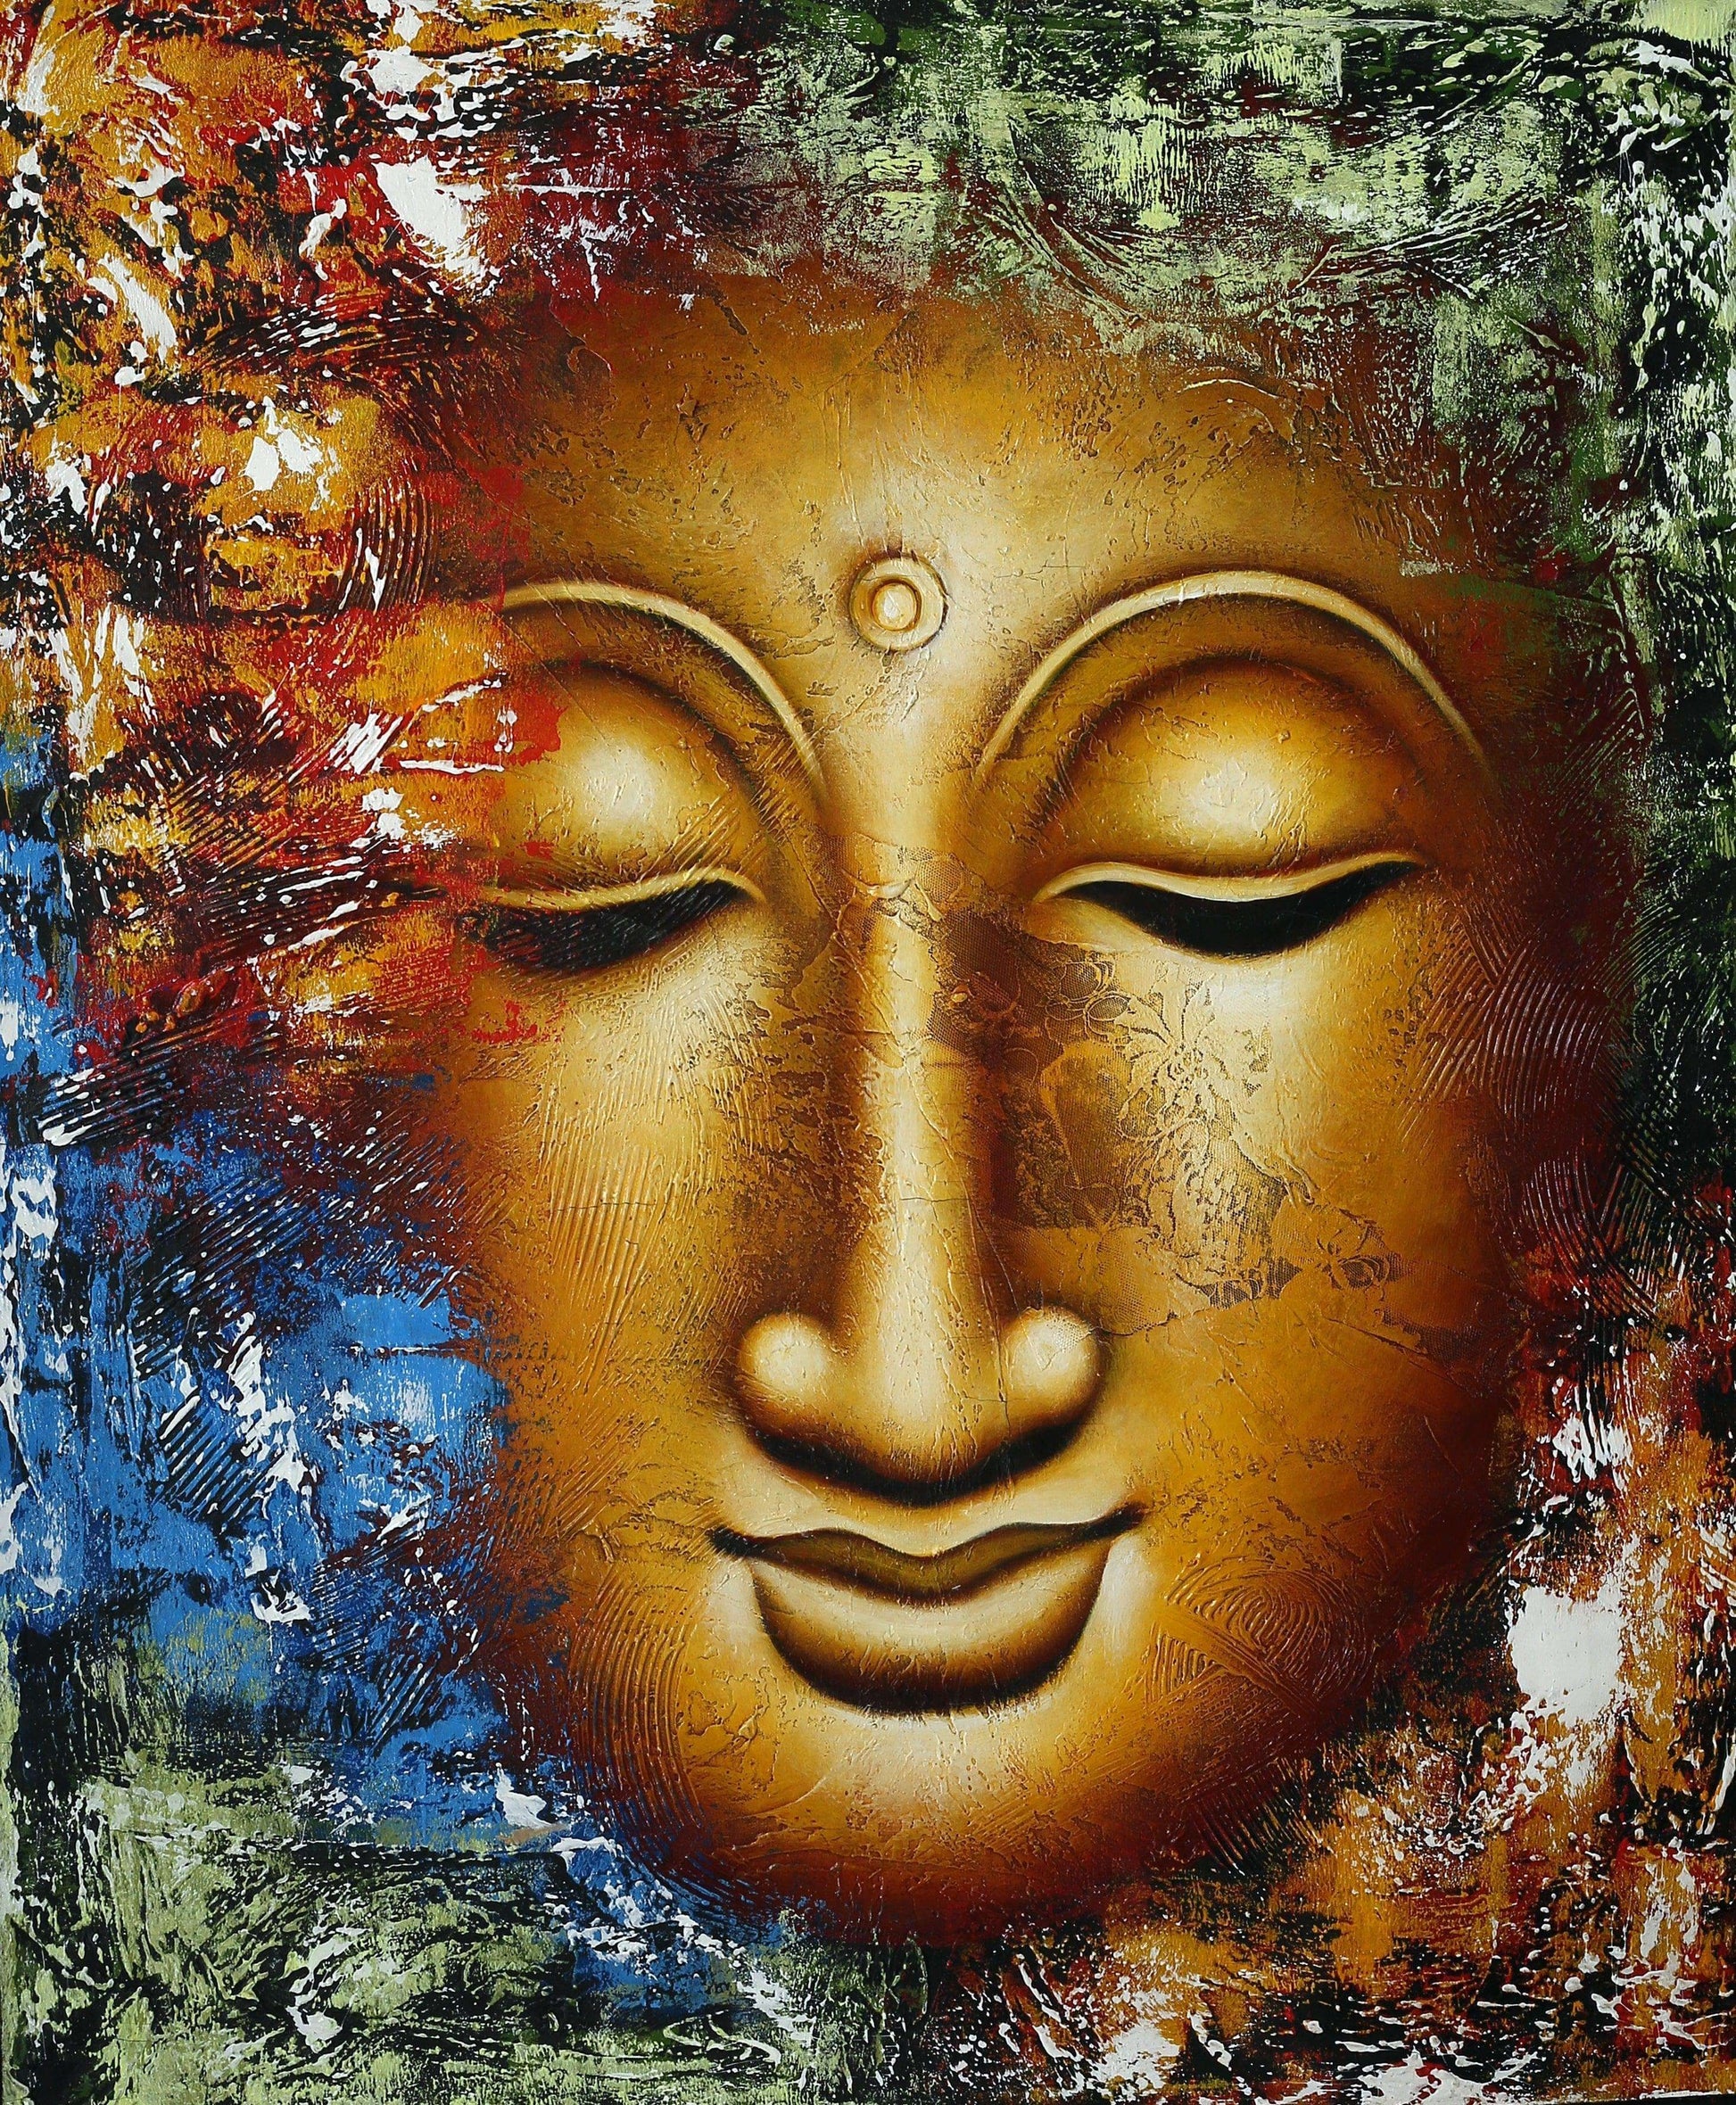 Abstract Gold Buddha Handmade Acrylic Painting Writings On The Wall Oil Painting